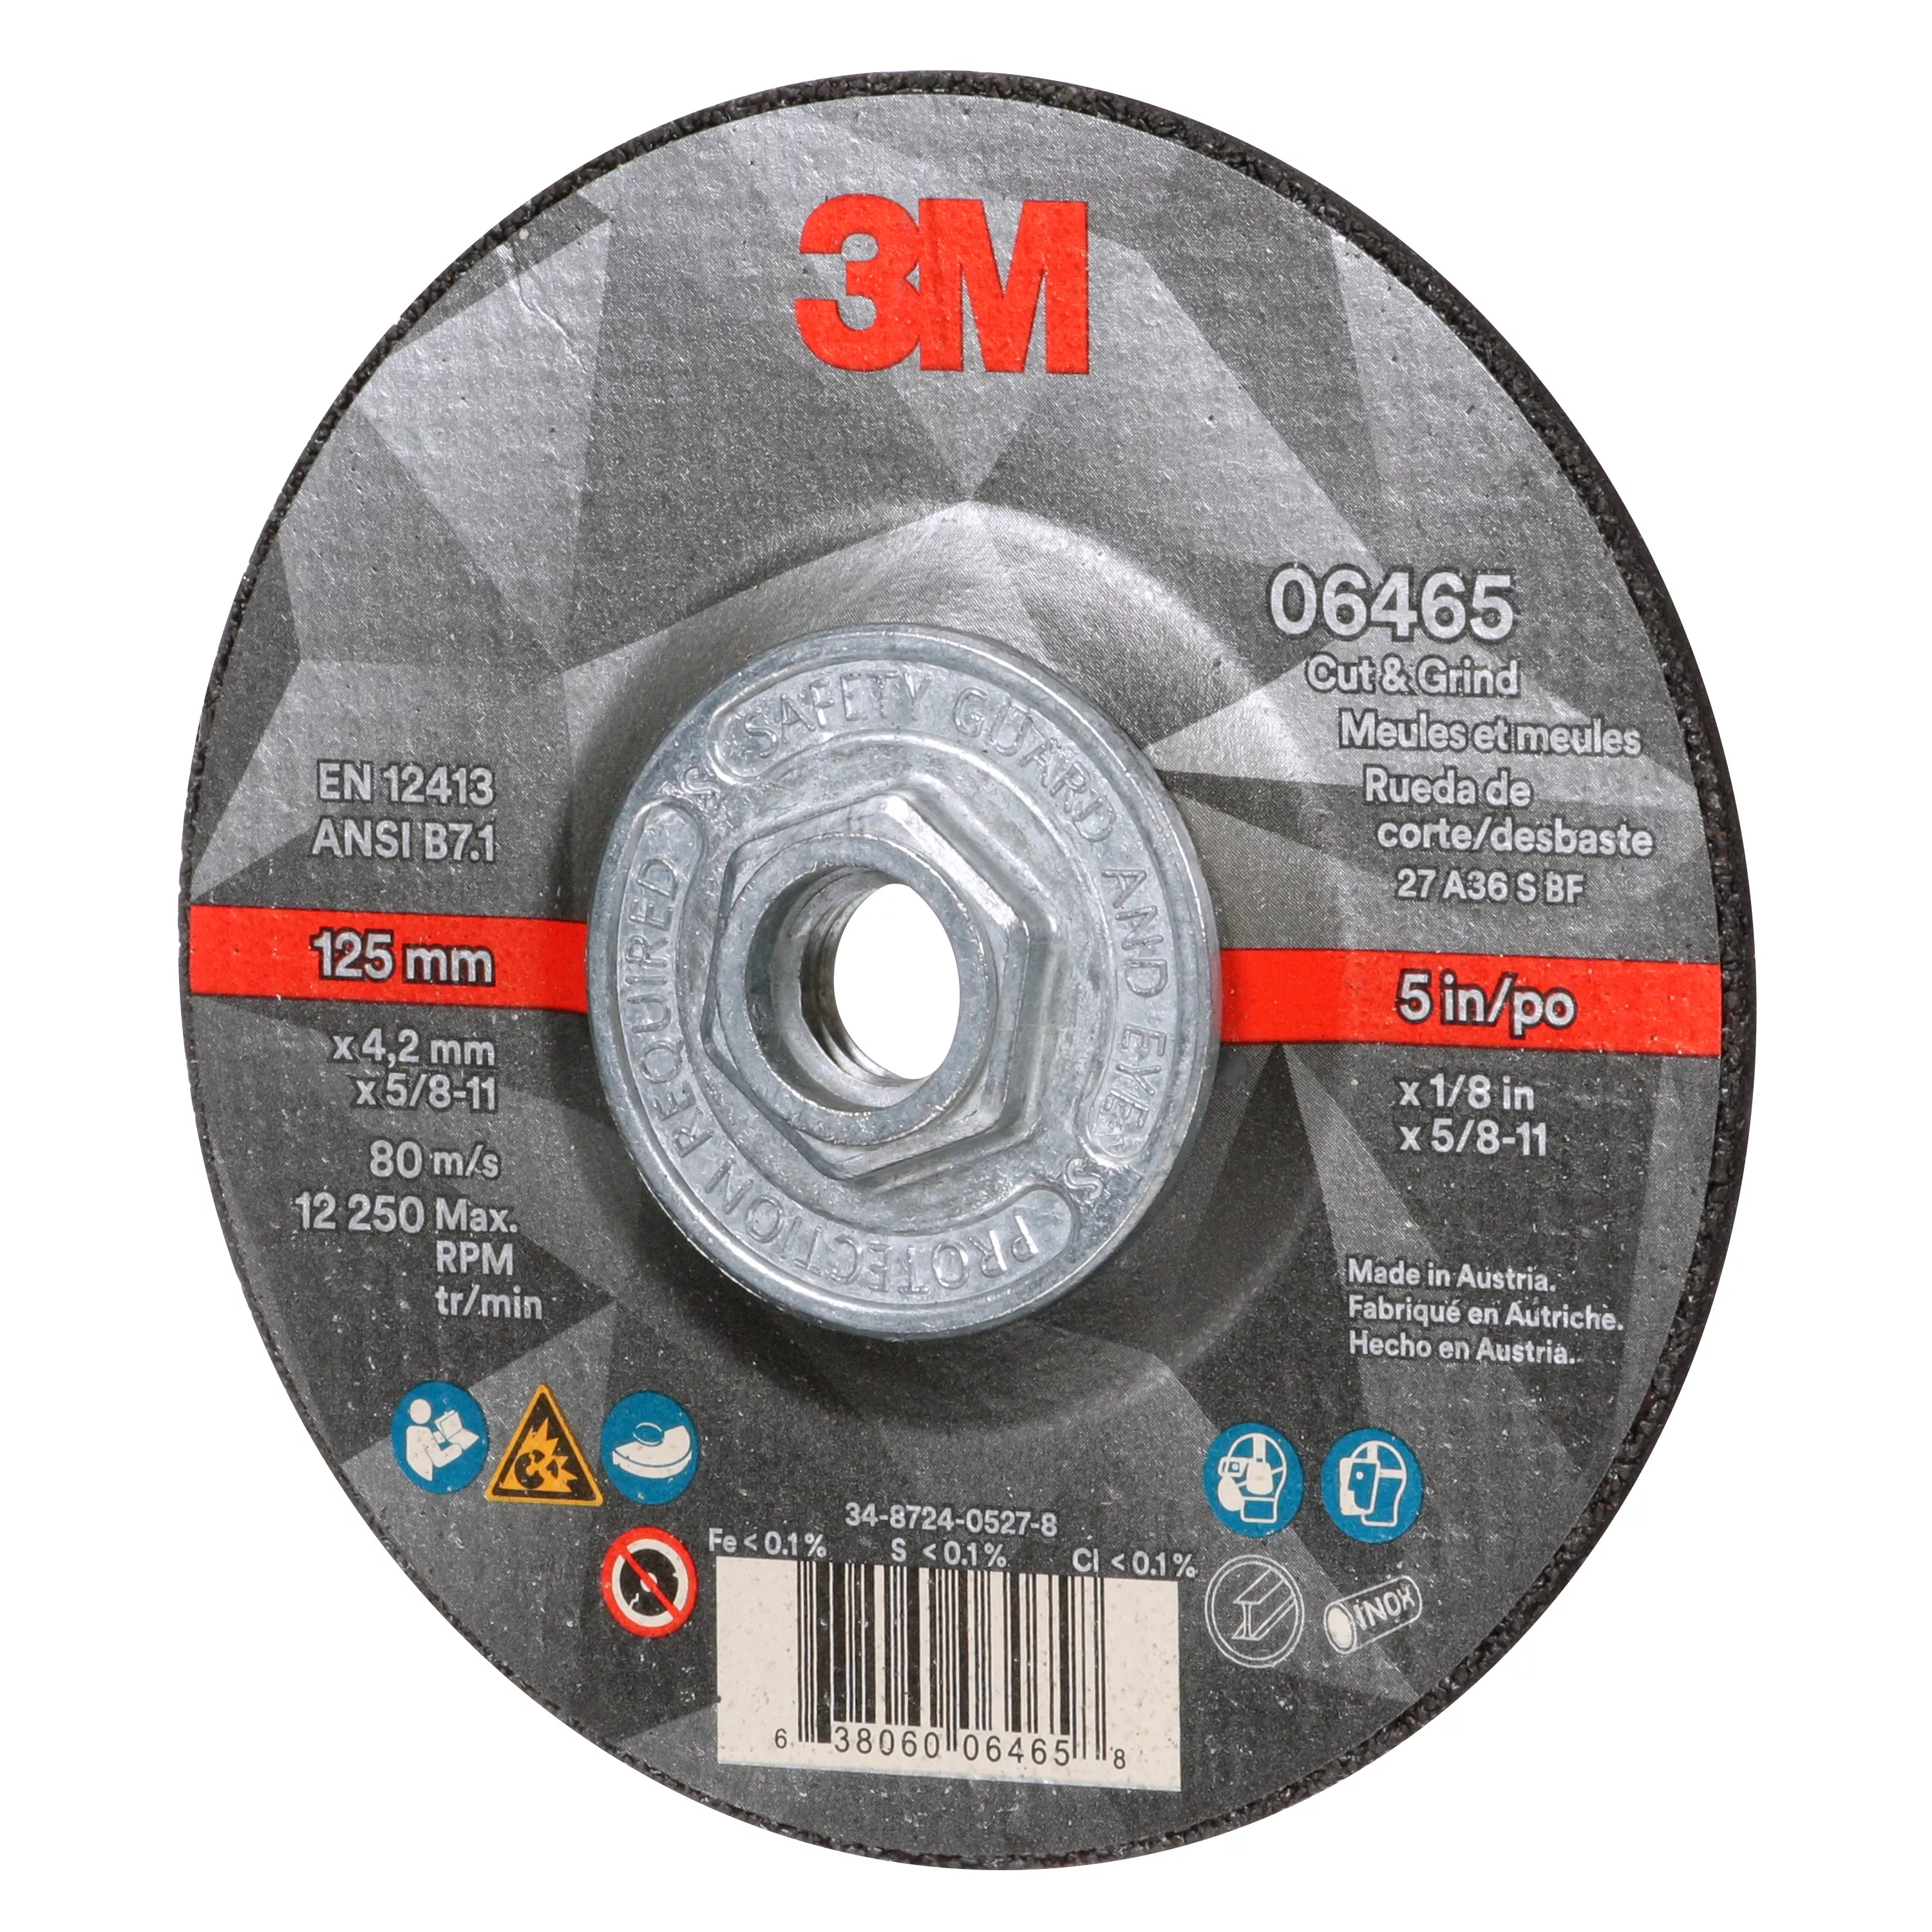 Product Number 06465 | 3M™ Cut & Grind Wheel